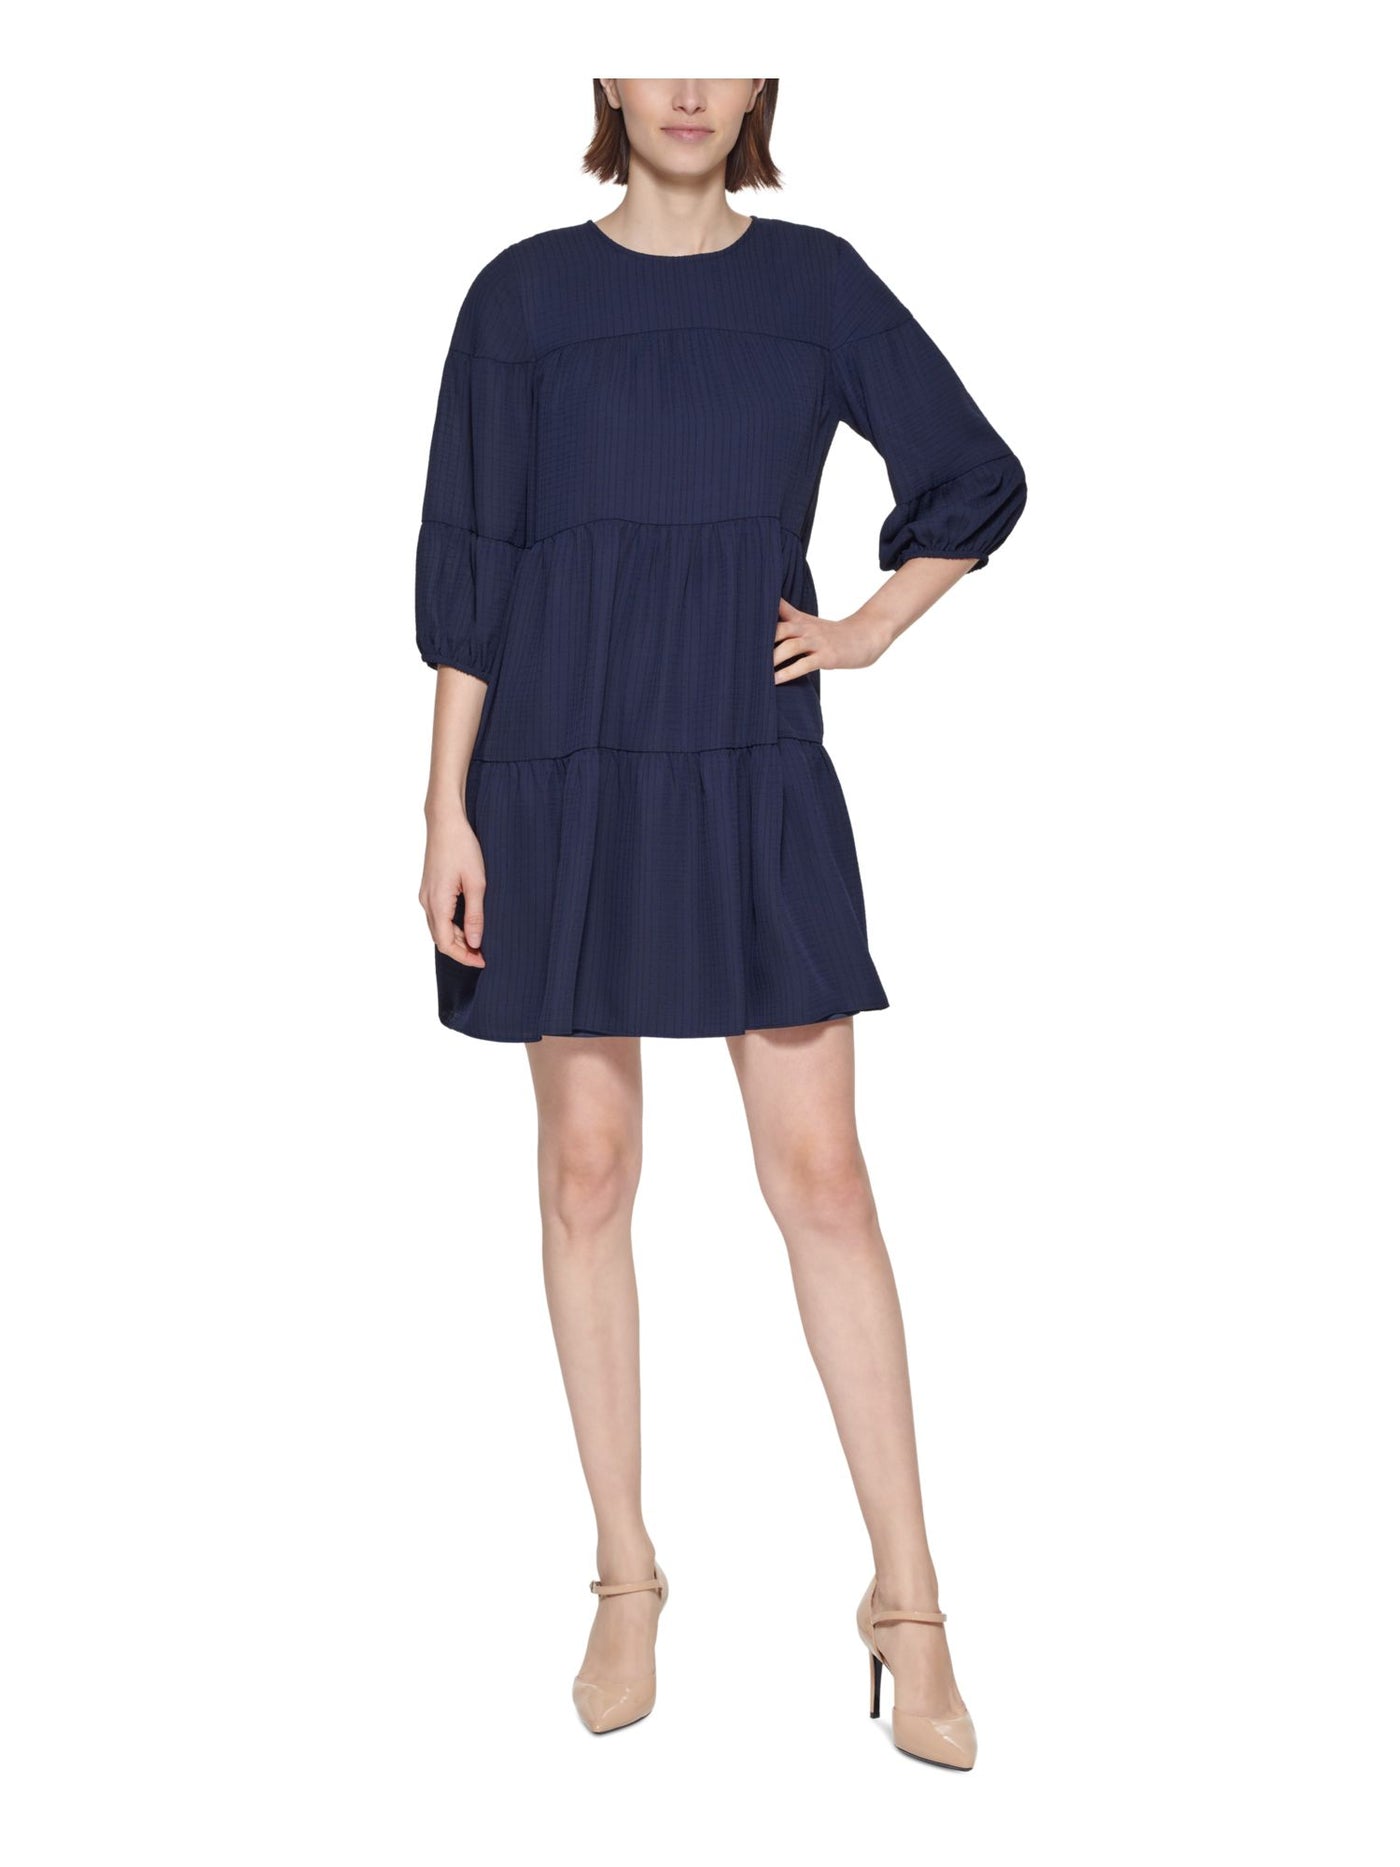 CALVIN KLEIN Womens Navy Textured Keyhole Back Tiered Lined 3/4 Sleeve Round Neck Short Shift Dress Petites 2P